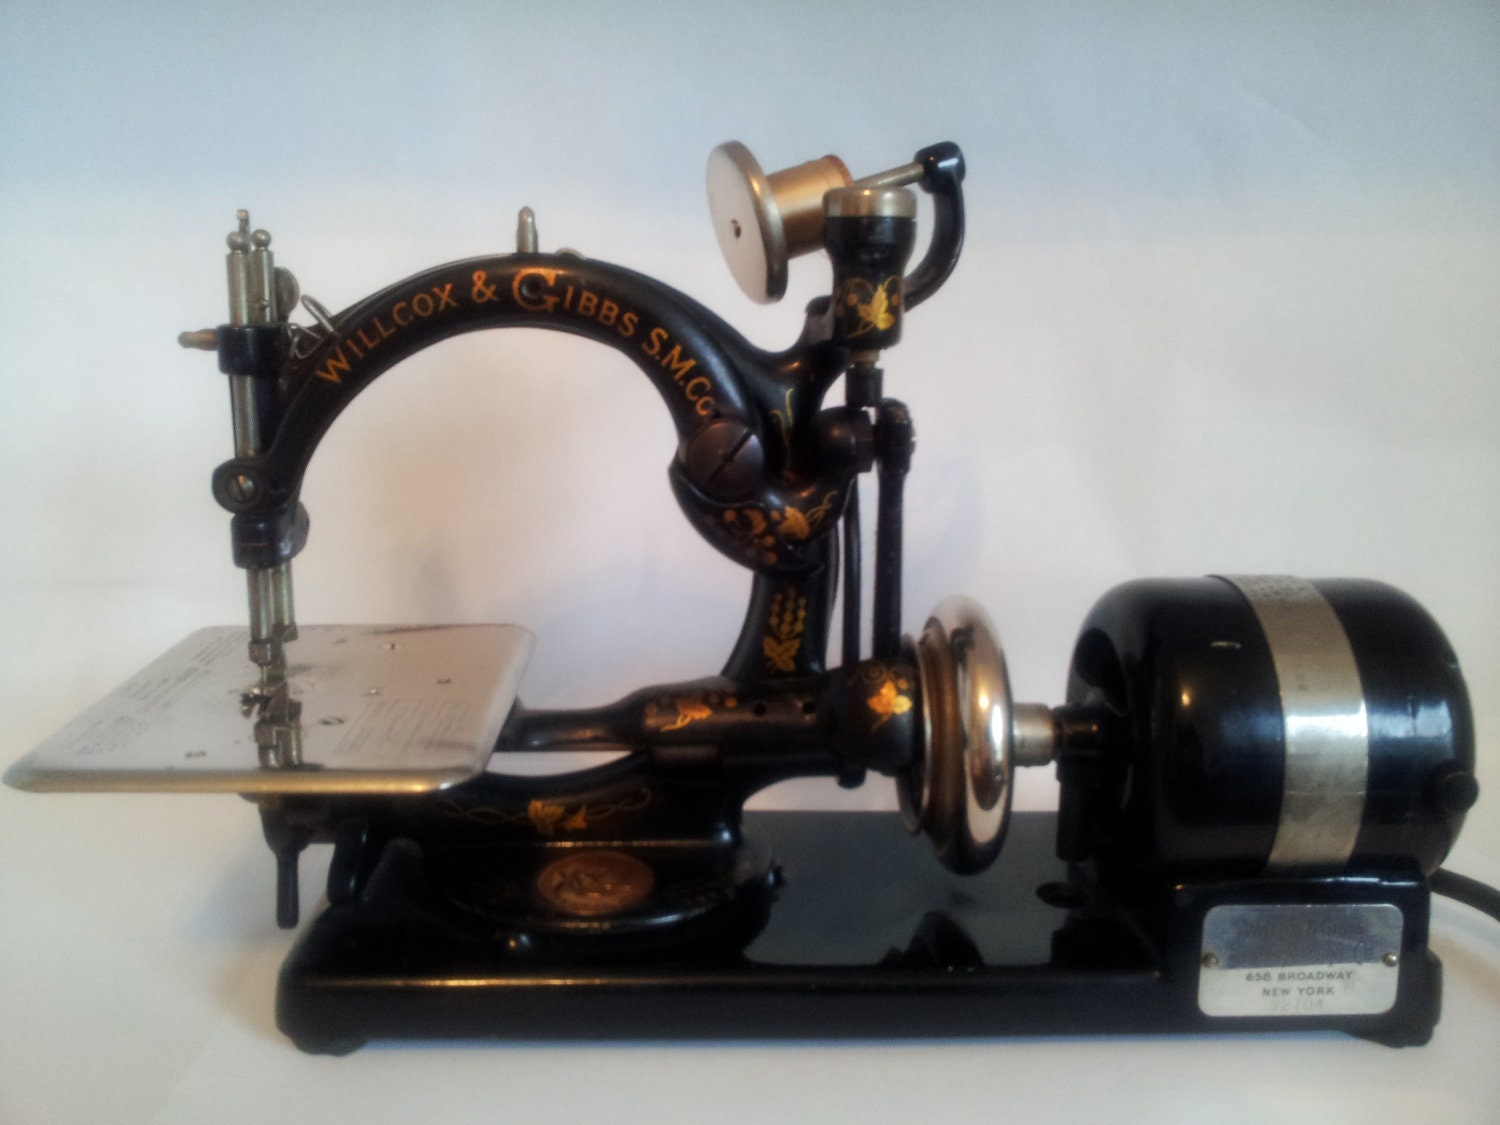 Antique Willcox and Gibbs Sewing Machine in Original Wooden Case